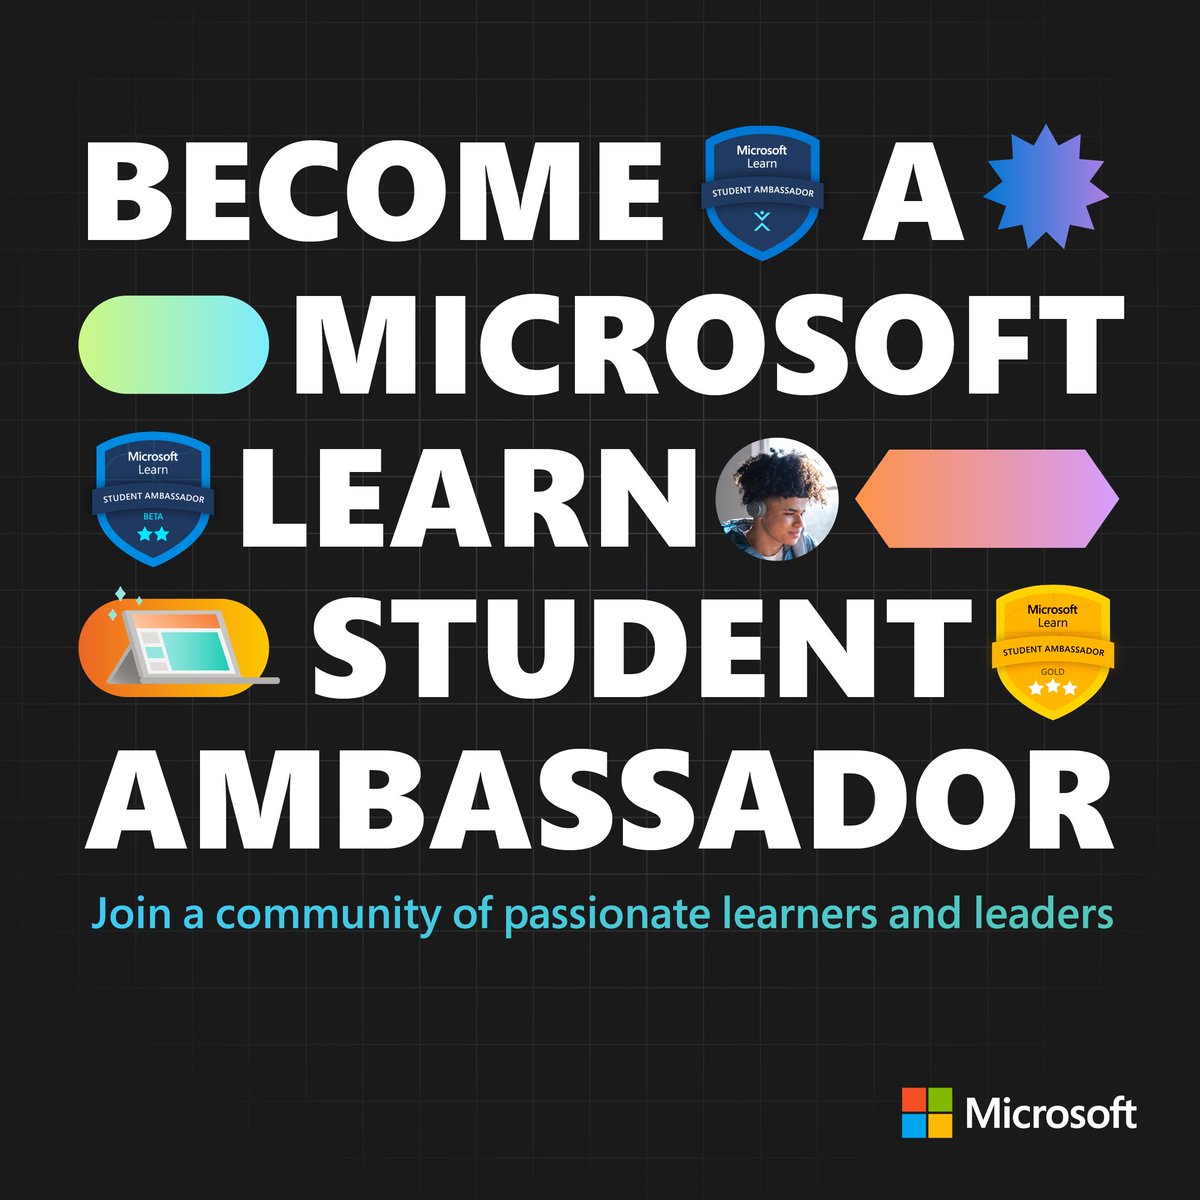 ⚙️ Grow technical #AI skills 💼 Boost leadership experience 🤝 Expand your network Take advantage of time between semesters and prepare to join this community of AI-passionate innovators and student leaders: msft.it/6017Yjwe1 #MicrosoftEDU #HigherEd